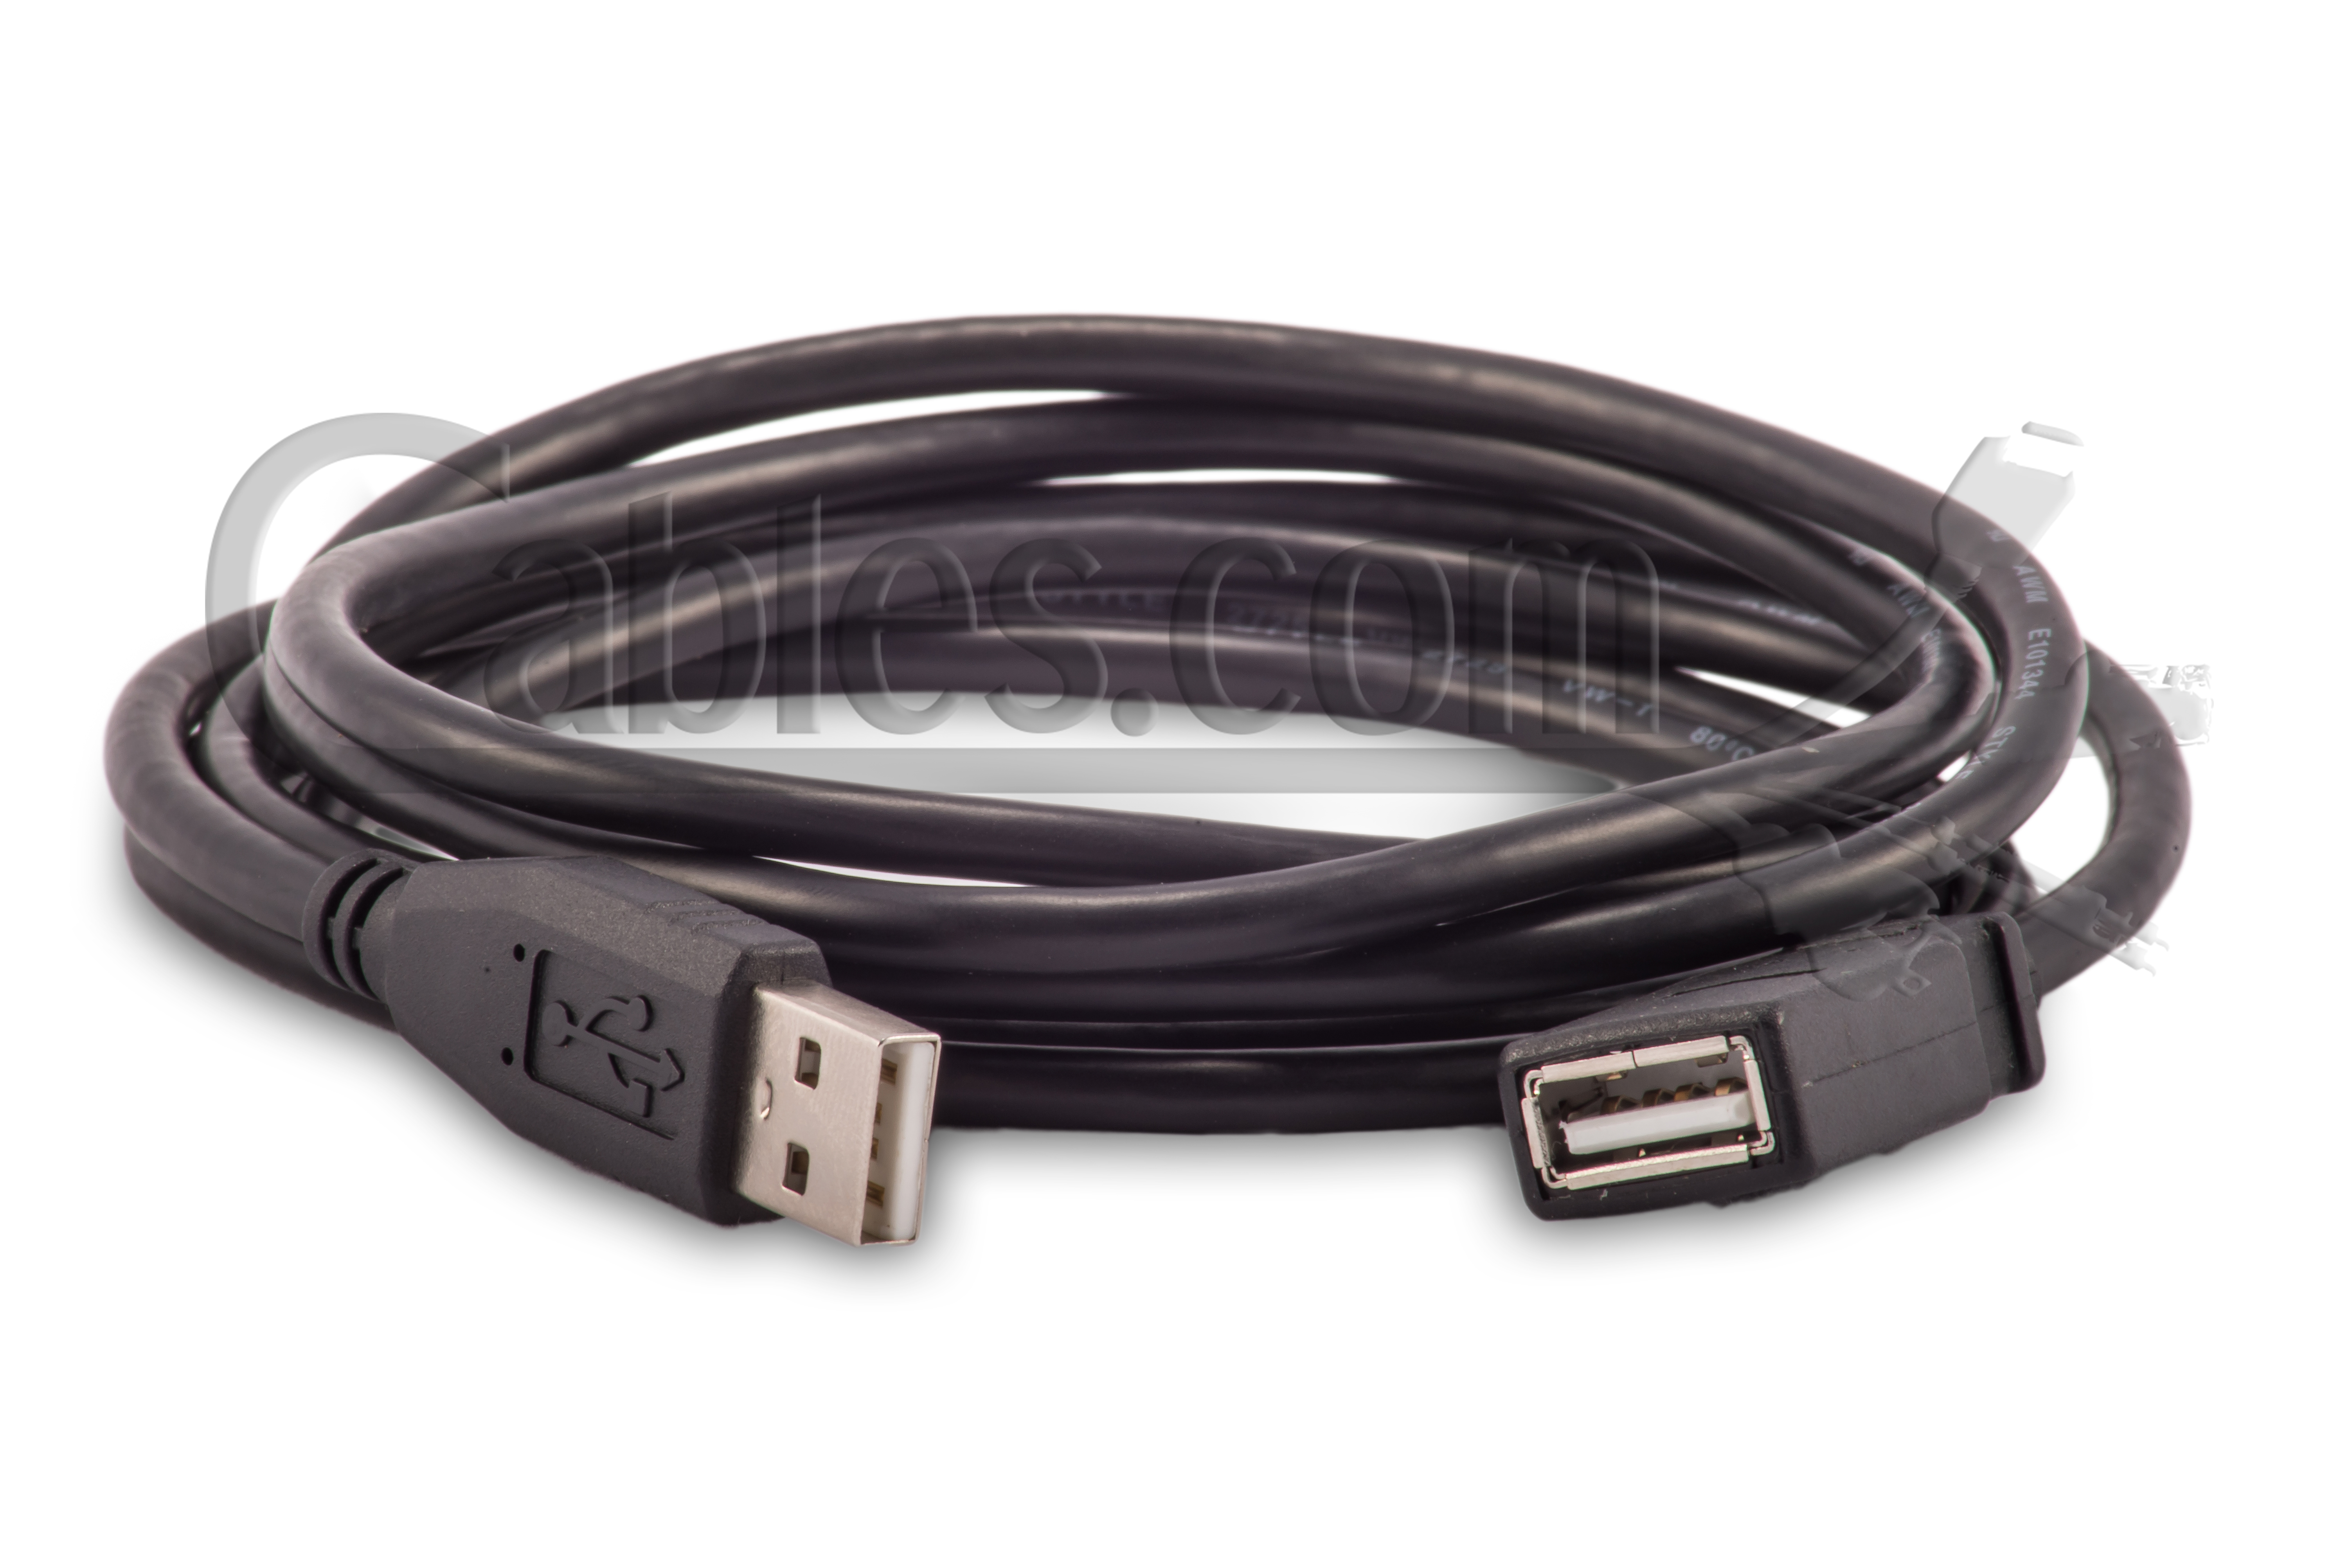 3FT USB 2.0 A-Male to A-Female Cable